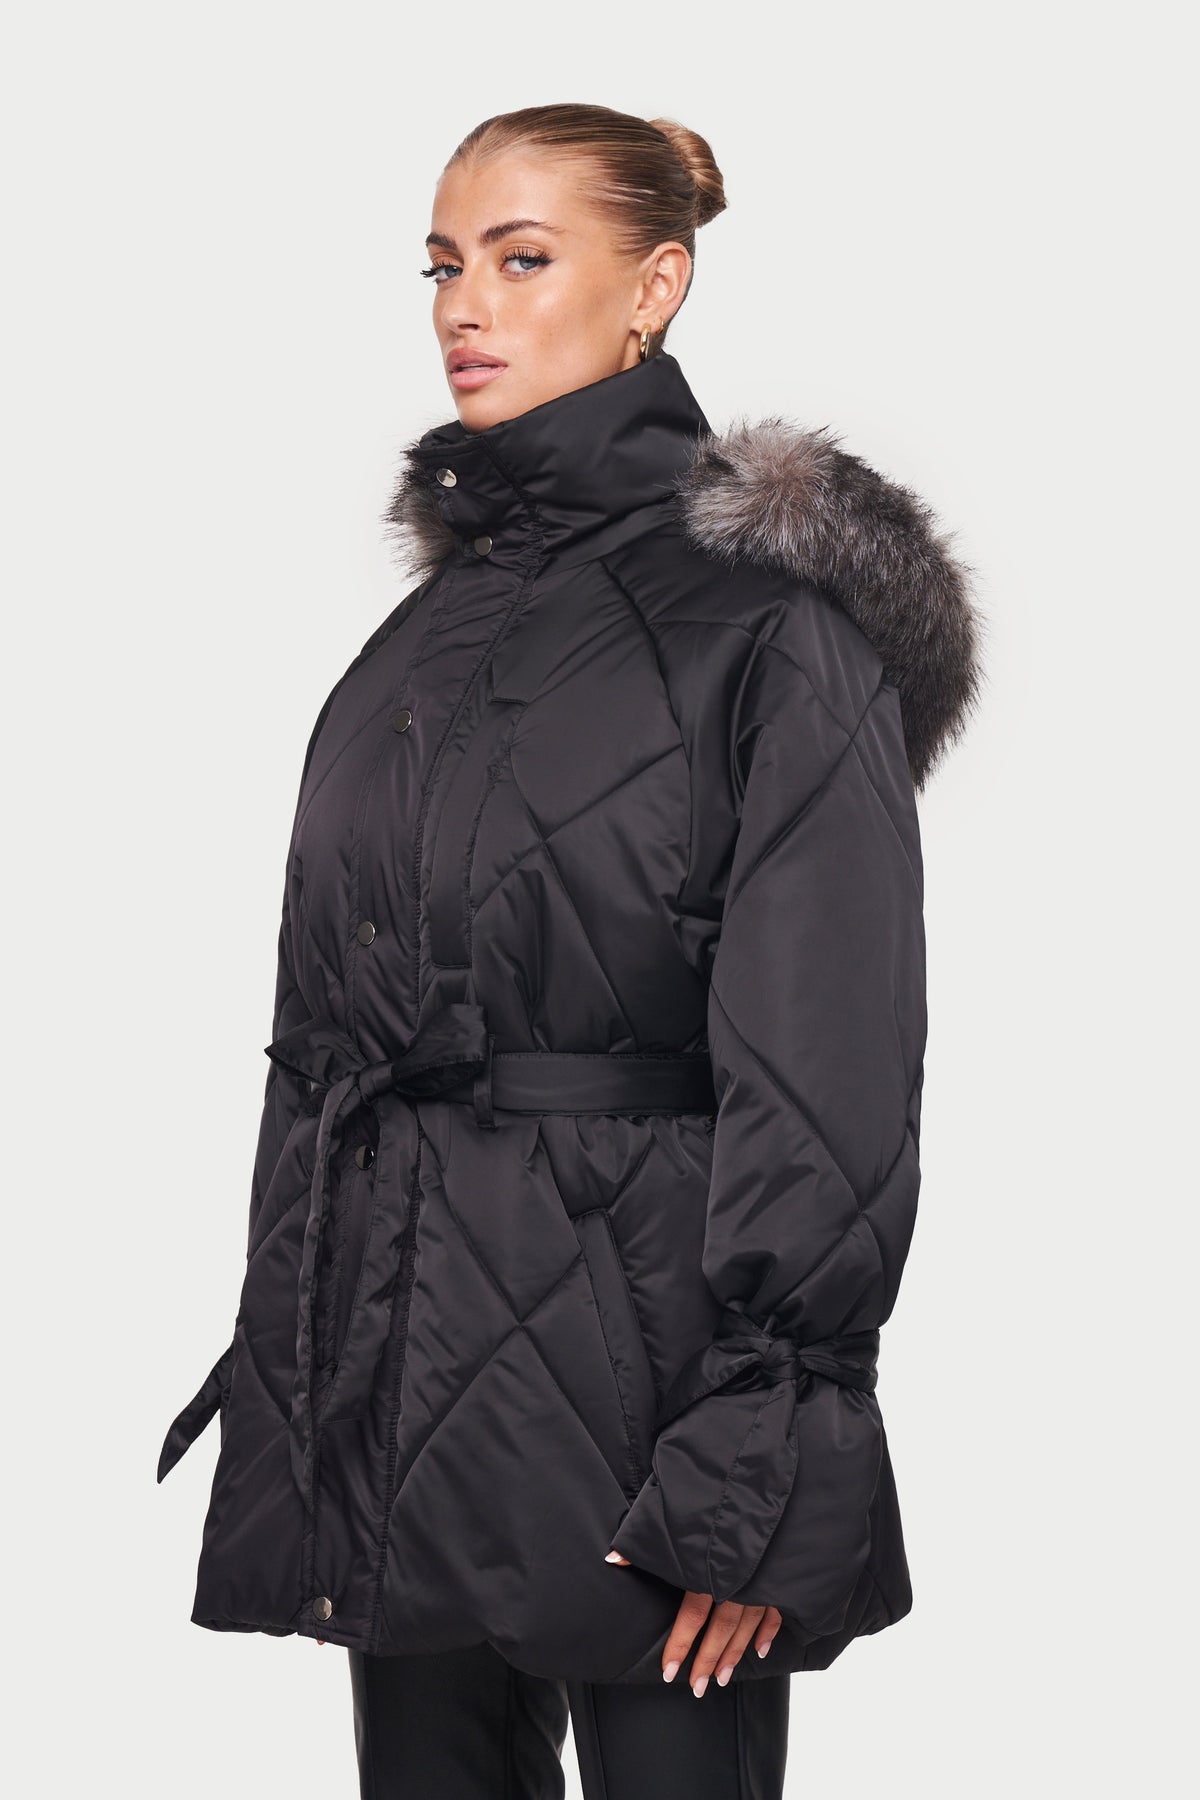 Black Oversize Fur Hooded Parka Jacket | The Couture Club